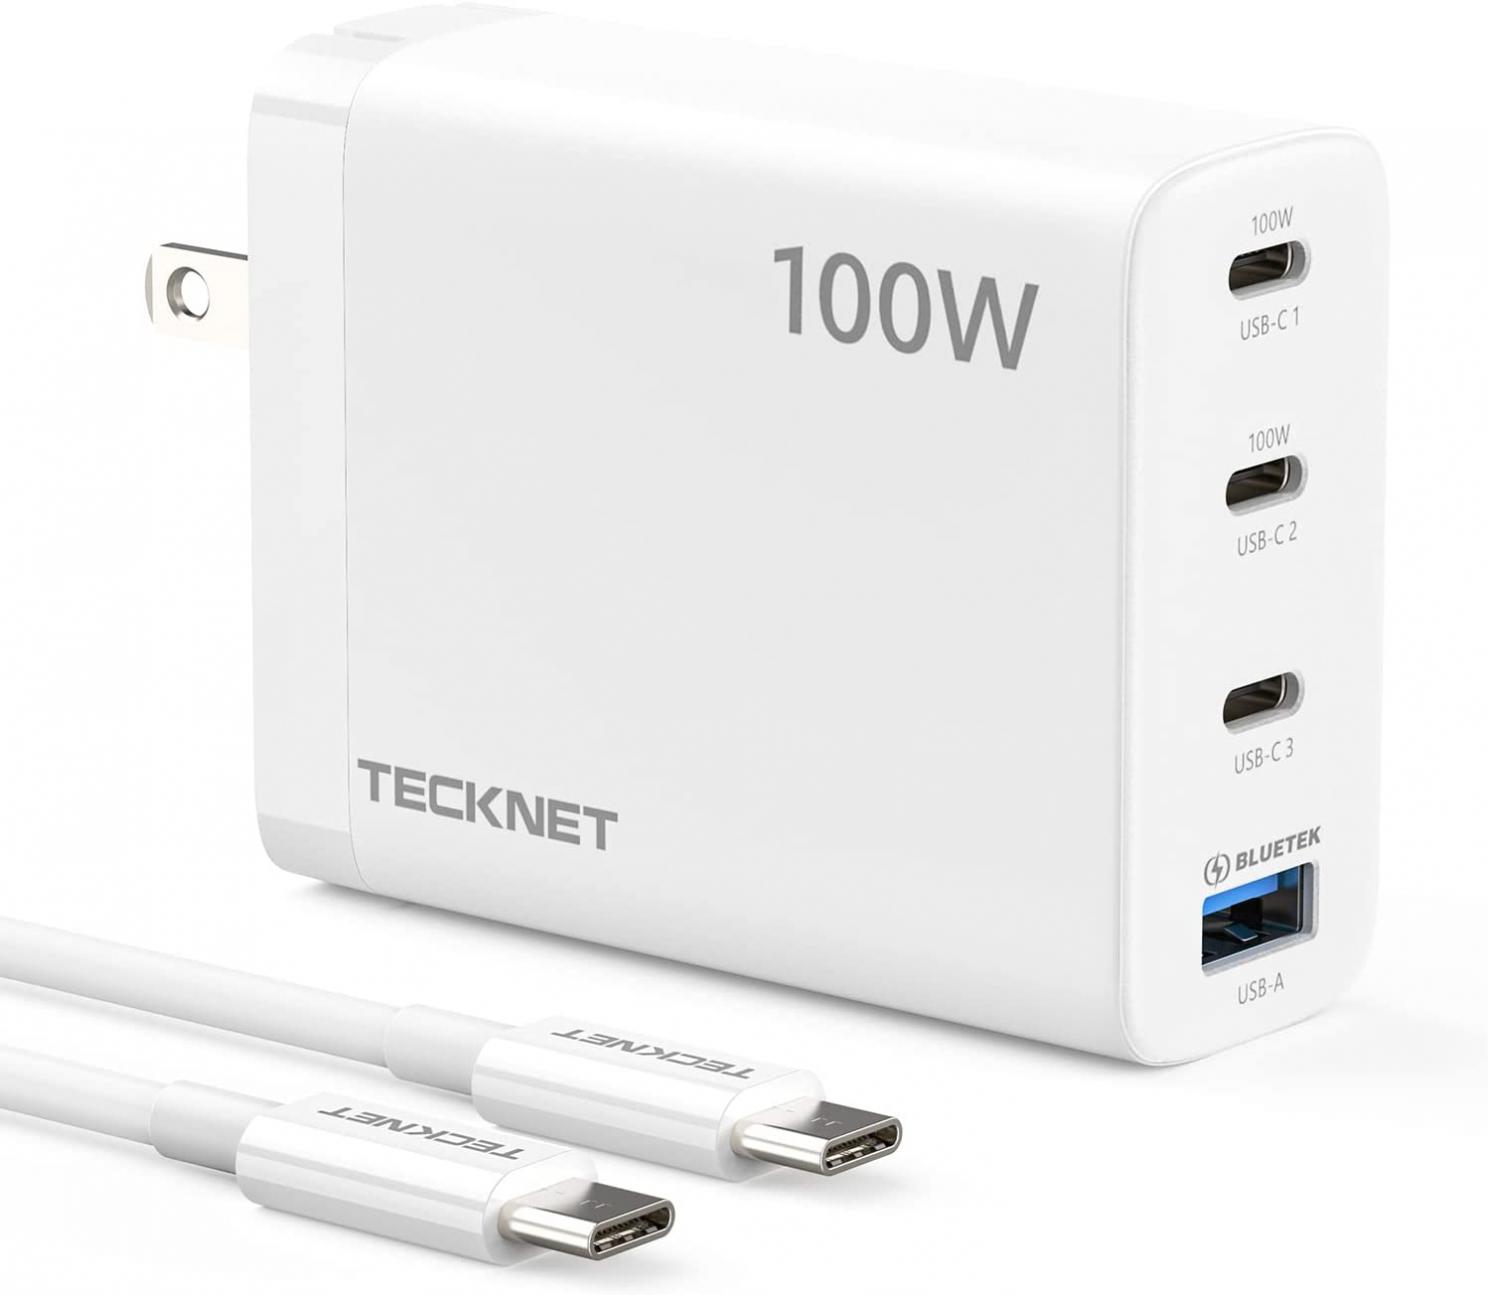 100W USB C Wall Charger, TECKNET 4 Port GaN Ⅲ Portable USB-C Fast Charger Block with Type C Cable, PD Power Adapter for iPhone 14/14 Pro, MacBook, iPad, AirPods, Dell XPS, Pixel, Samsung, PS5, Switch